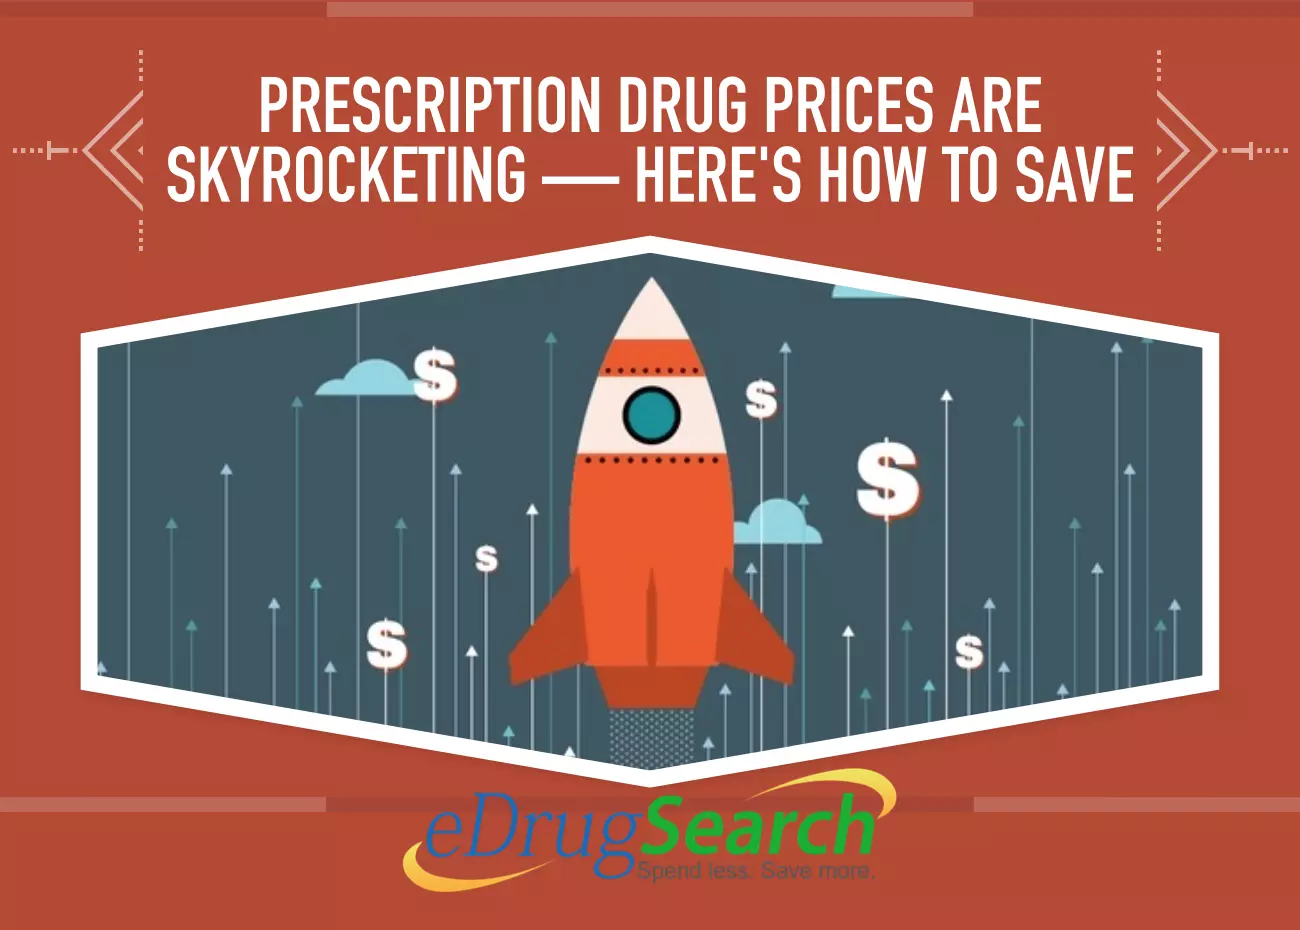 Prescription Drug Prices Are Skyrocketing -- Here's How to Save